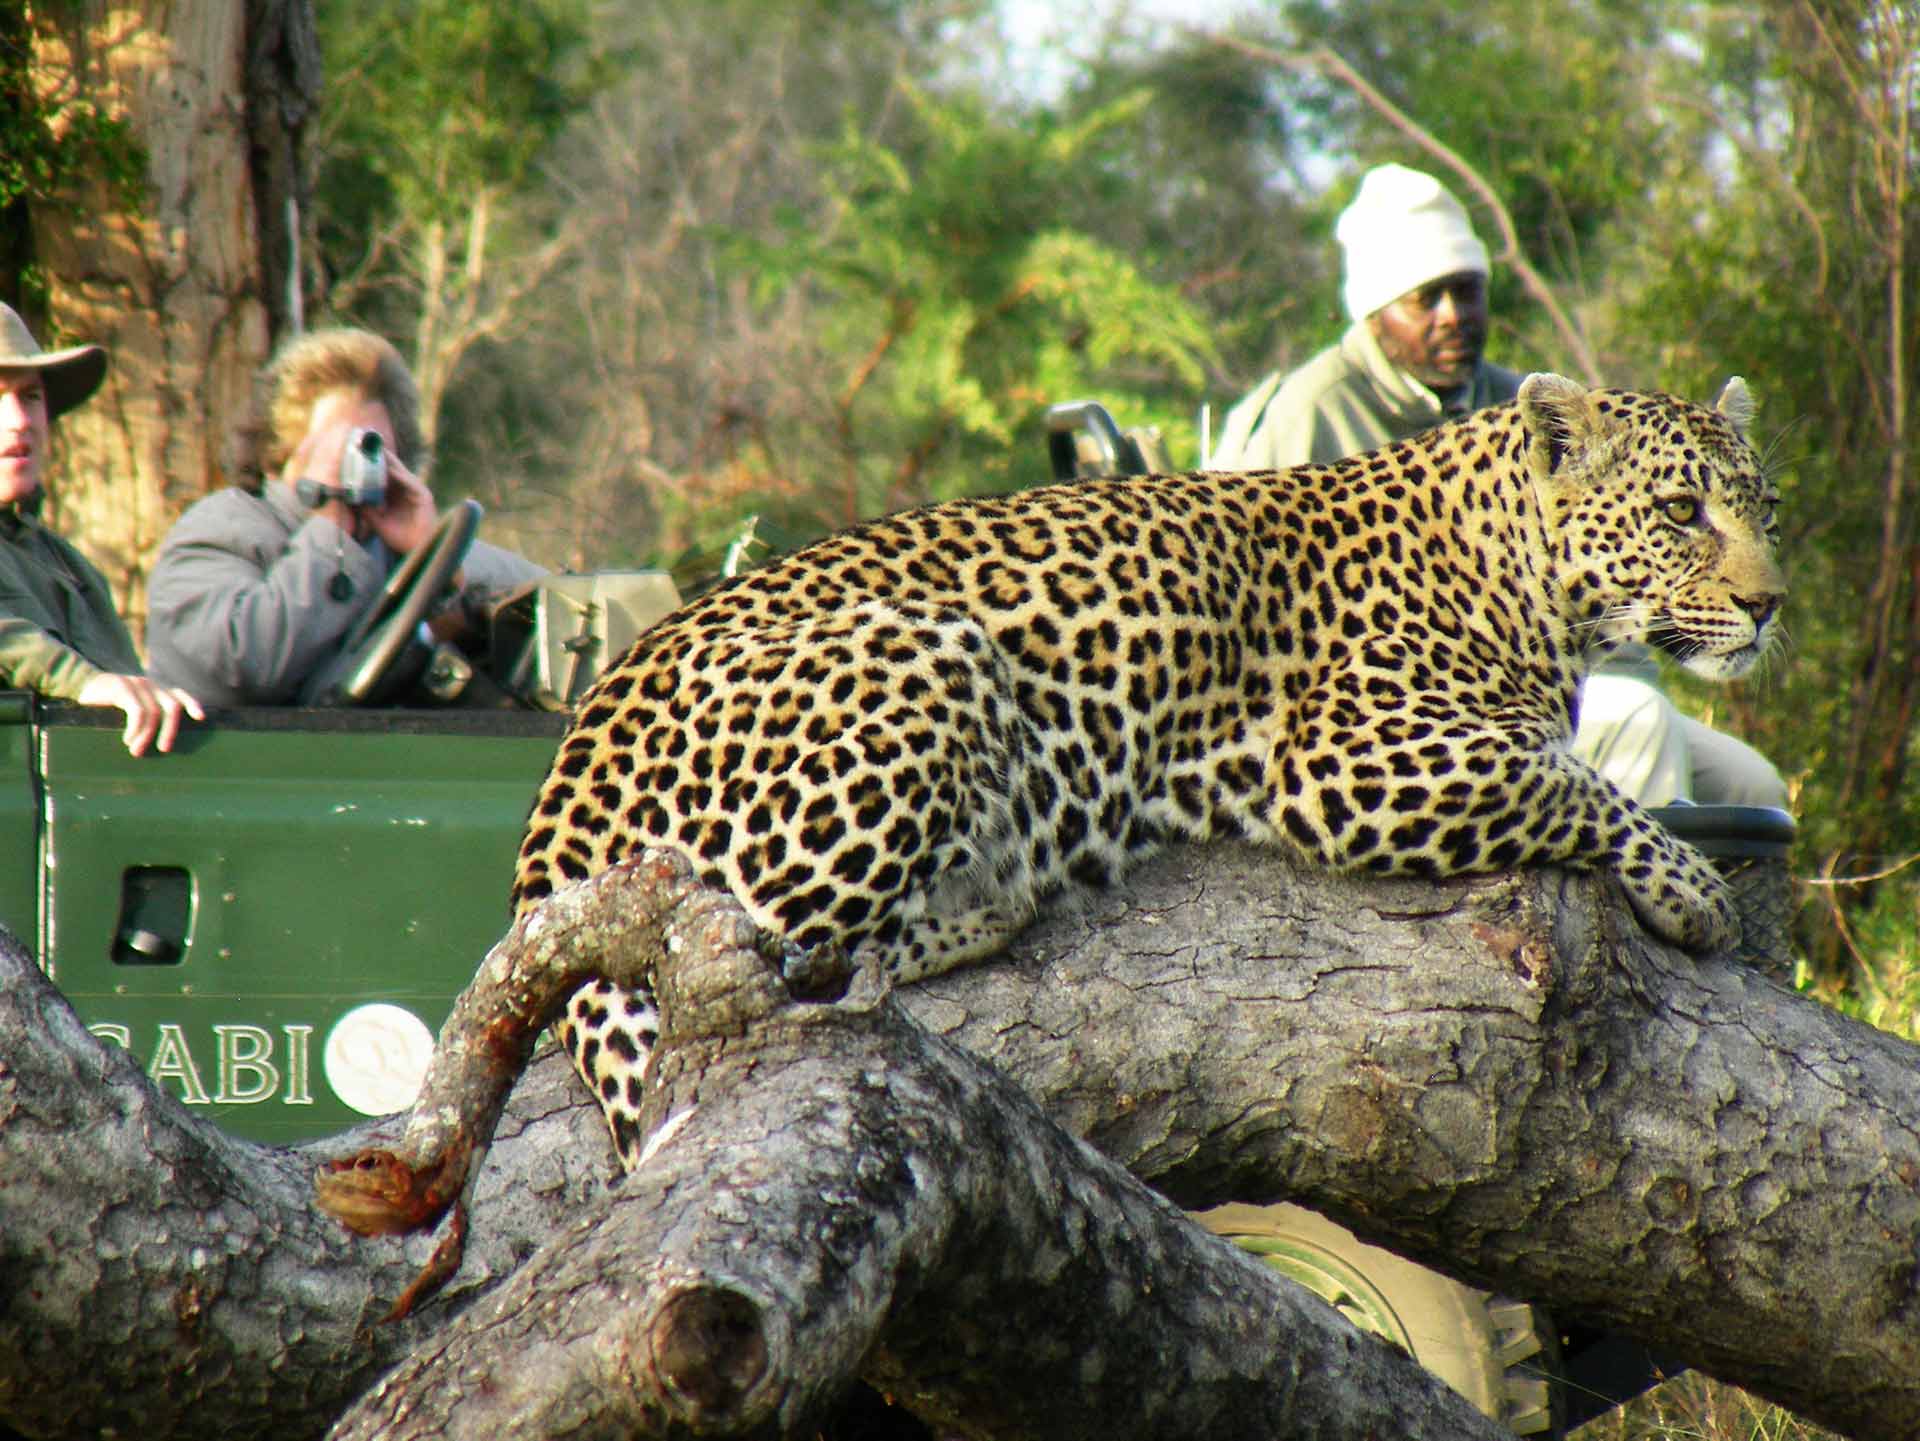 Leopard with tourists in jeep in background